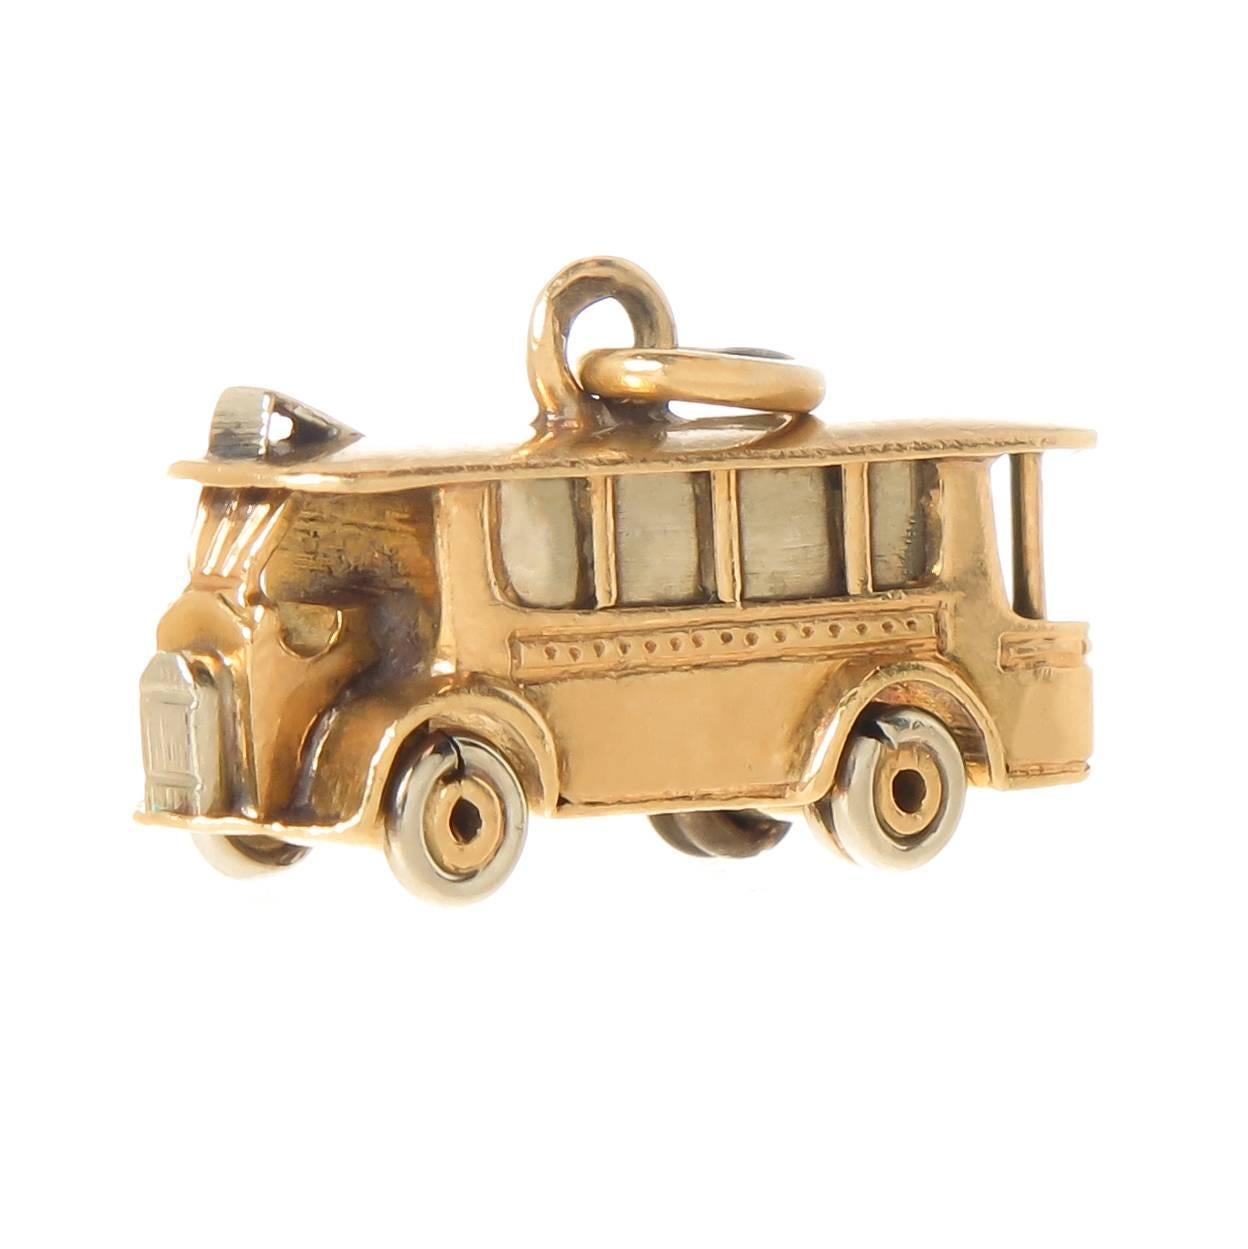 Circa 1950 Cartier 18K yellow Gold Street car Charm, This very detailed charm with moving parts measures 5/8 inch in length and 1/4 inch wide. signed, numbered and never worn this charm comes in the original Gift Box. 